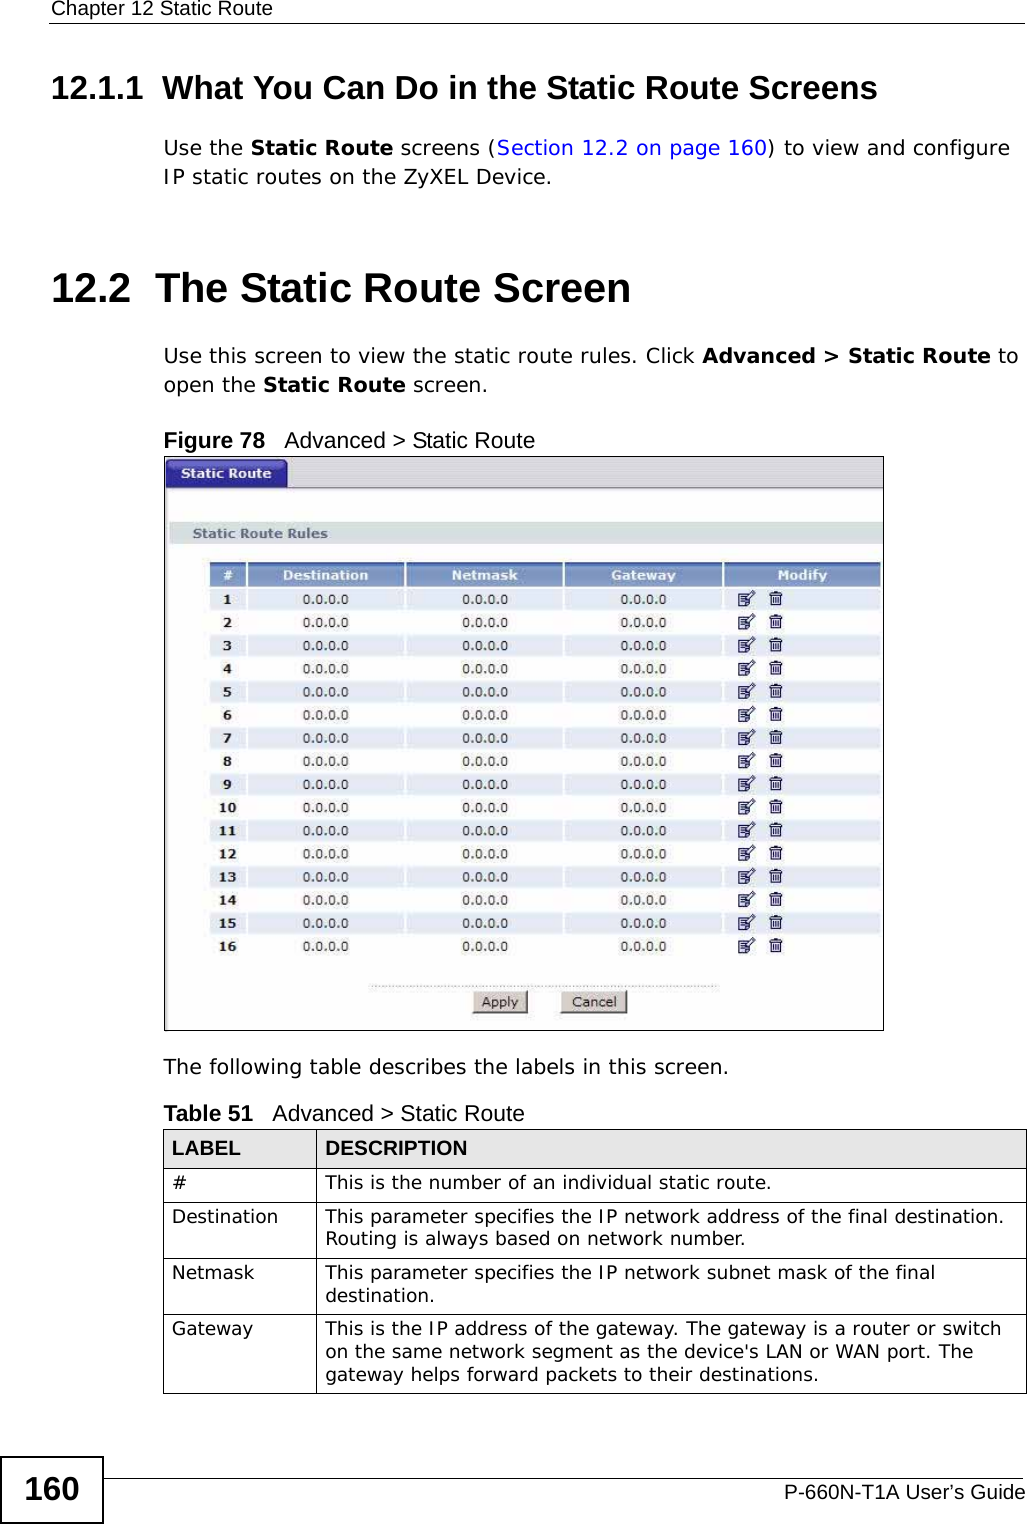 Chapter 12 Static RouteP-660N-T1A User’s Guide16012.1.1  What You Can Do in the Static Route ScreensUse the Static Route screens (Section 12.2 on page 160) to view and configure IP static routes on the ZyXEL Device.12.2  The Static Route ScreenUse this screen to view the static route rules. Click Advanced &gt; Static Route to open the Static Route screen.Figure 78   Advanced &gt; Static RouteThe following table describes the labels in this screen. Table 51   Advanced &gt; Static RouteLABEL DESCRIPTION#This is the number of an individual static route.Destination This parameter specifies the IP network address of the final destination. Routing is always based on network number. Netmask This parameter specifies the IP network subnet mask of the final destination.Gateway This is the IP address of the gateway. The gateway is a router or switch on the same network segment as the device&apos;s LAN or WAN port. The gateway helps forward packets to their destinations.